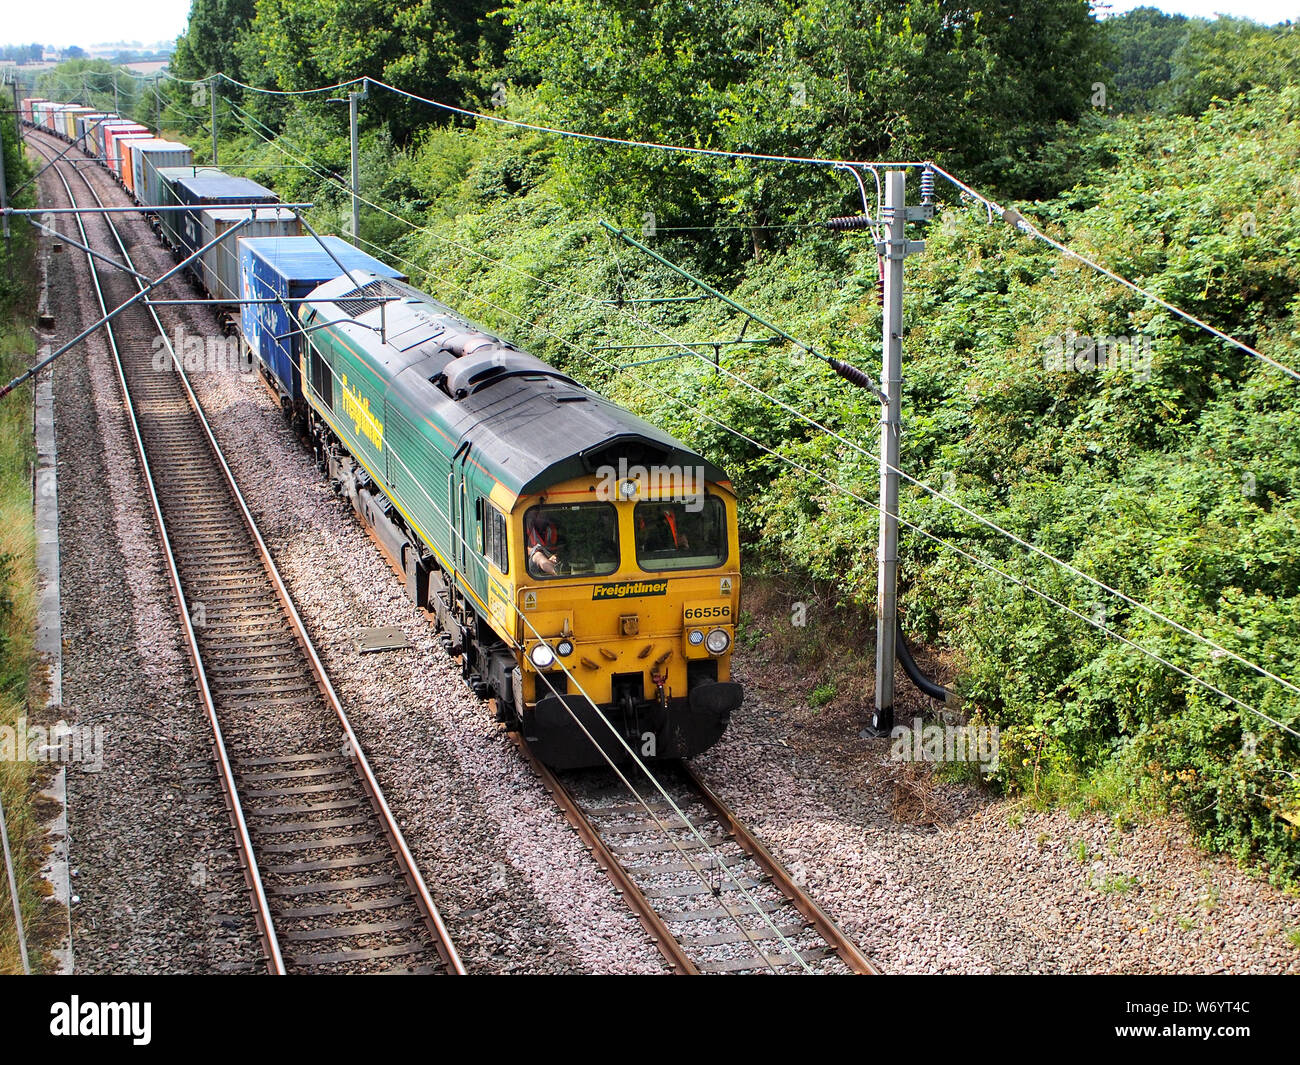 Freightliner Class 66556  hauls an intermodal freight train on the West Coast Mainline in Northamptonshire, UK Stock Photo